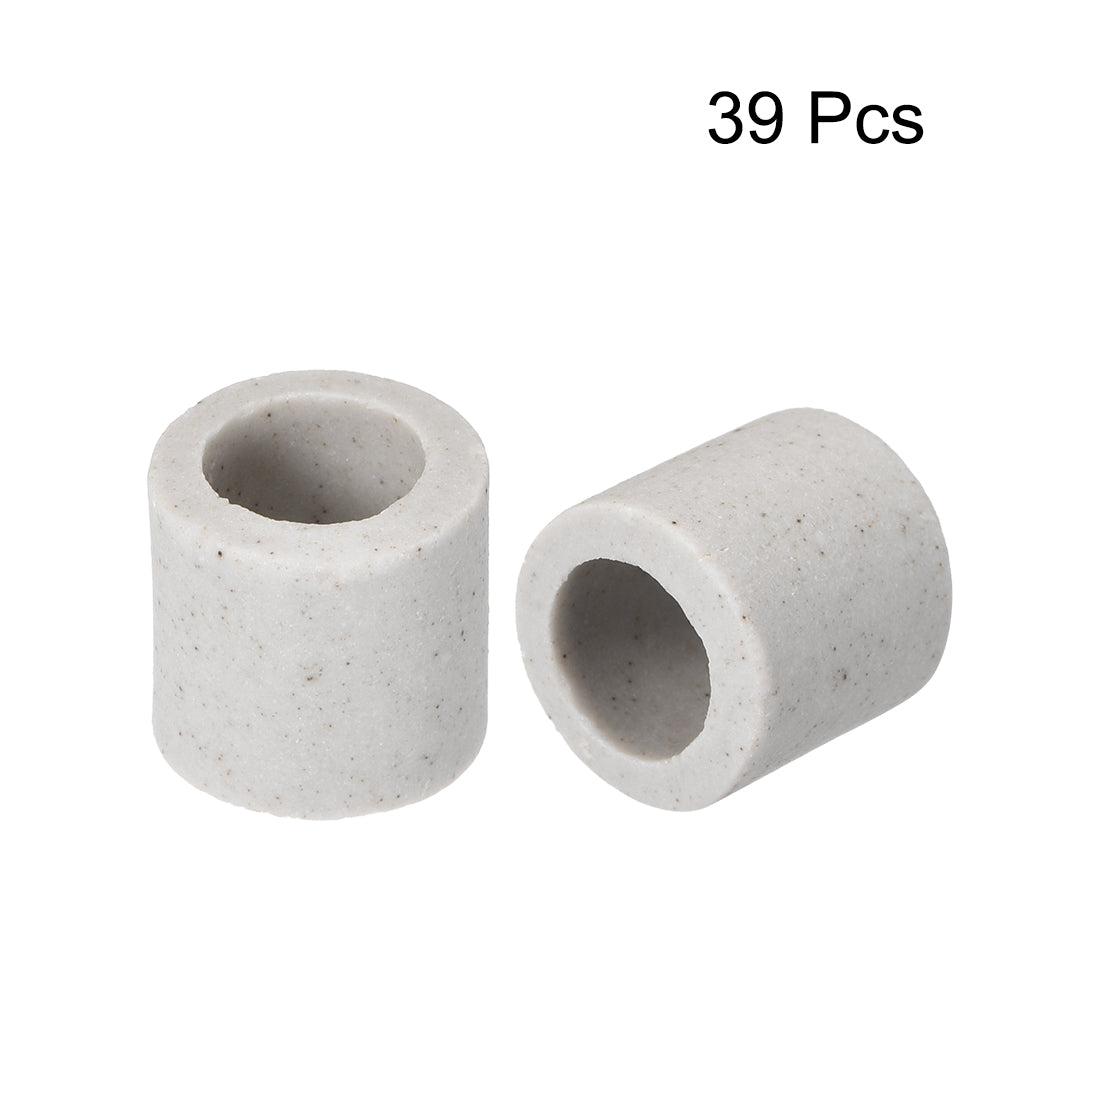 uxcell Uxcell 8mm Dia Ceramic Insulation Tube Single Bore Porcelain Insulator Pipe 39 Pcs